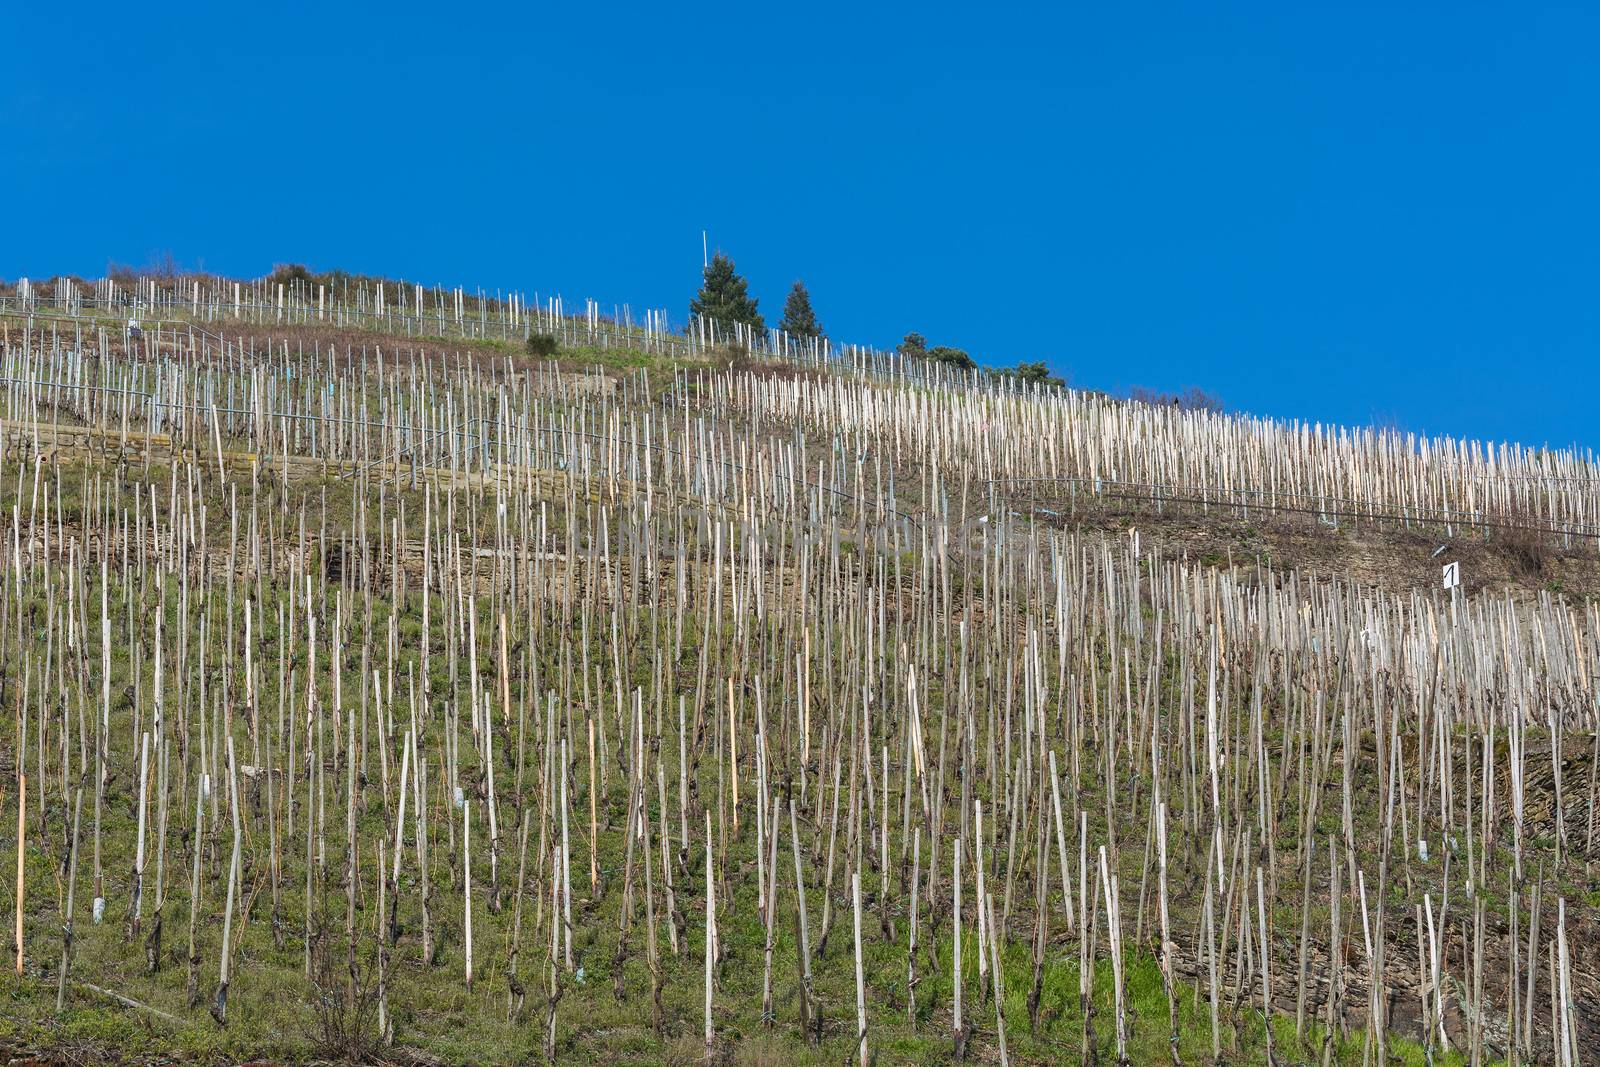 Vineyards on the Moselle against a blue sky.